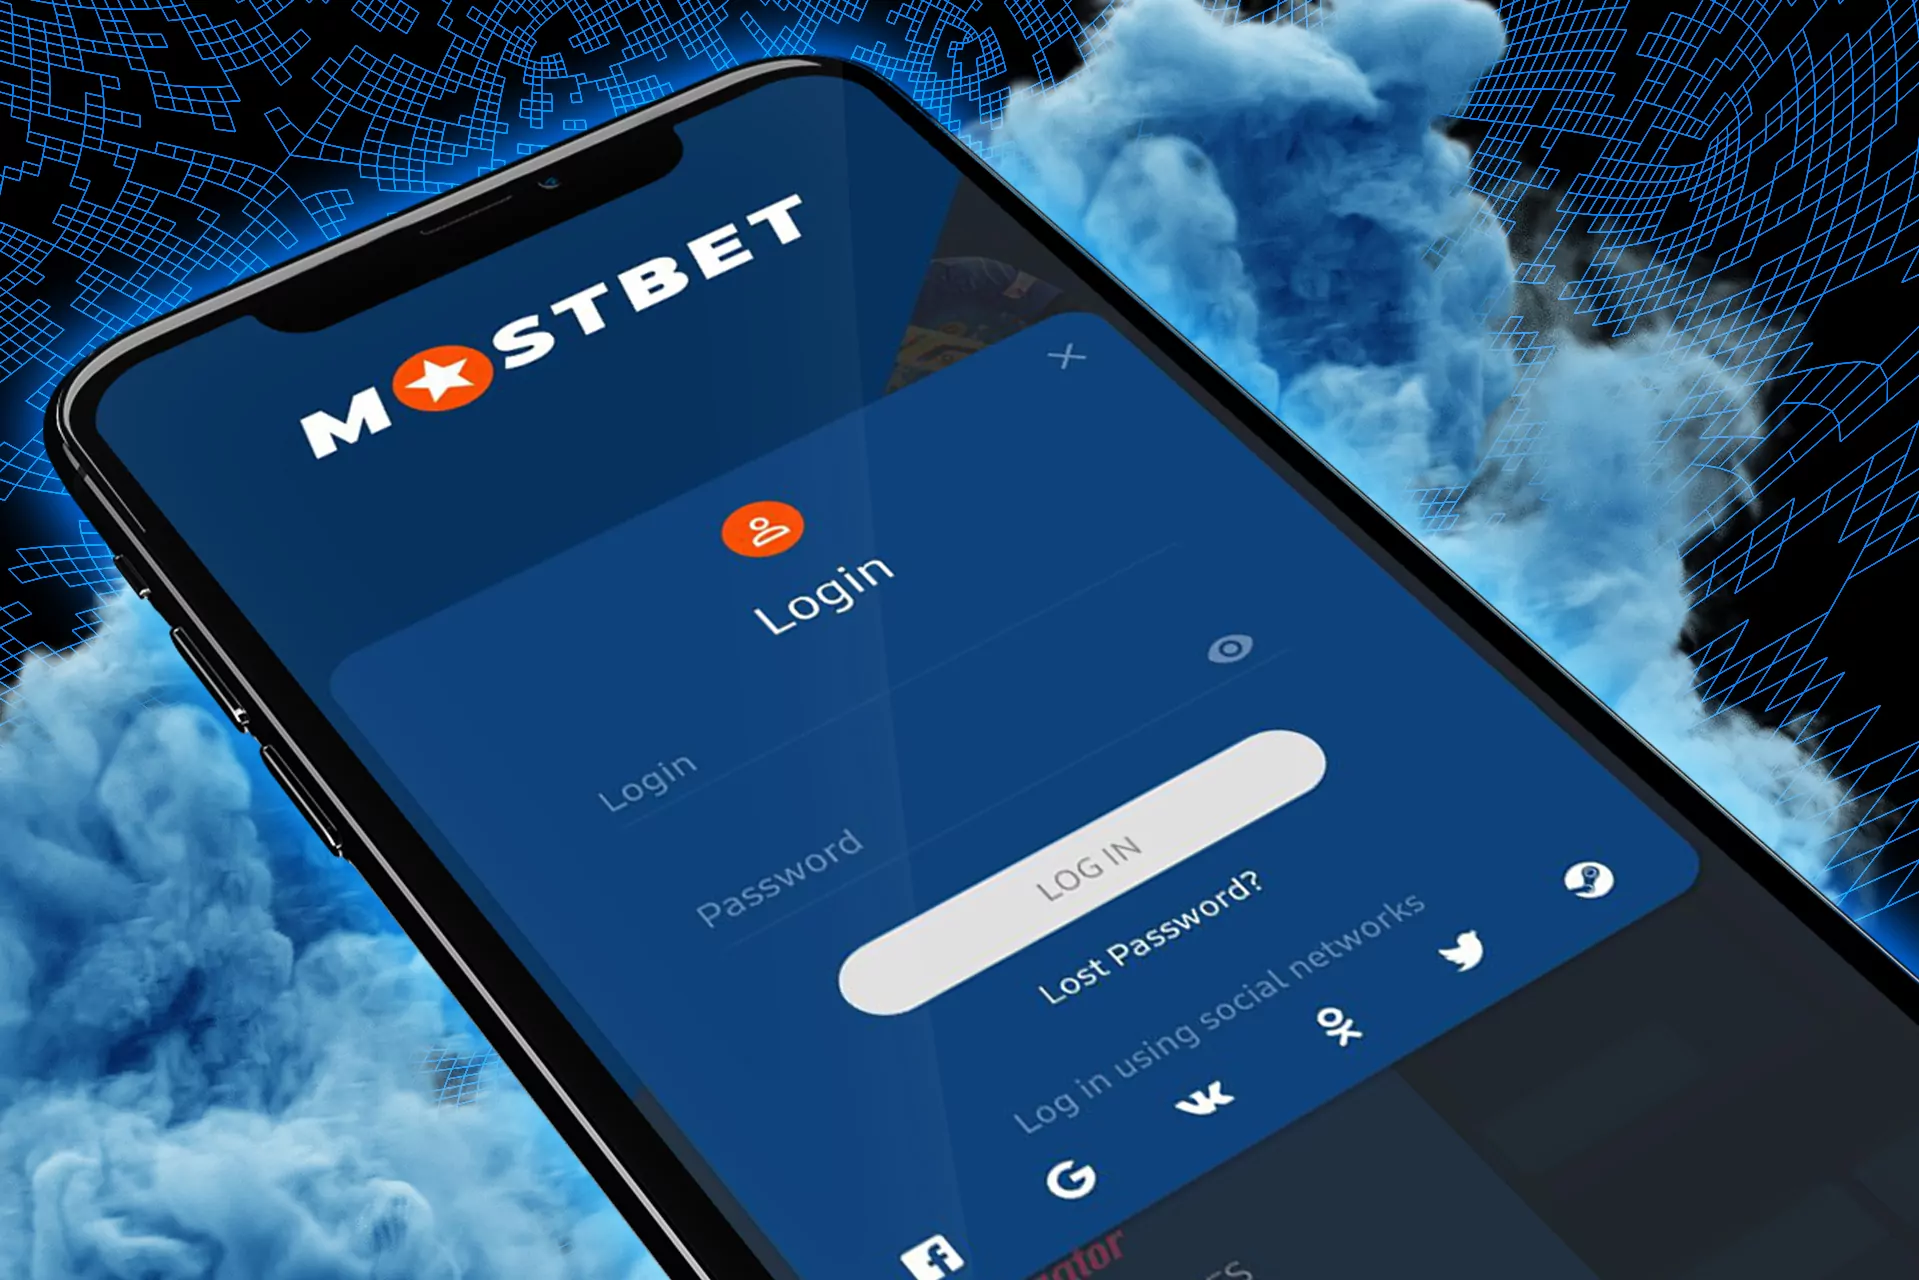 Login to Mostbet account in the app.